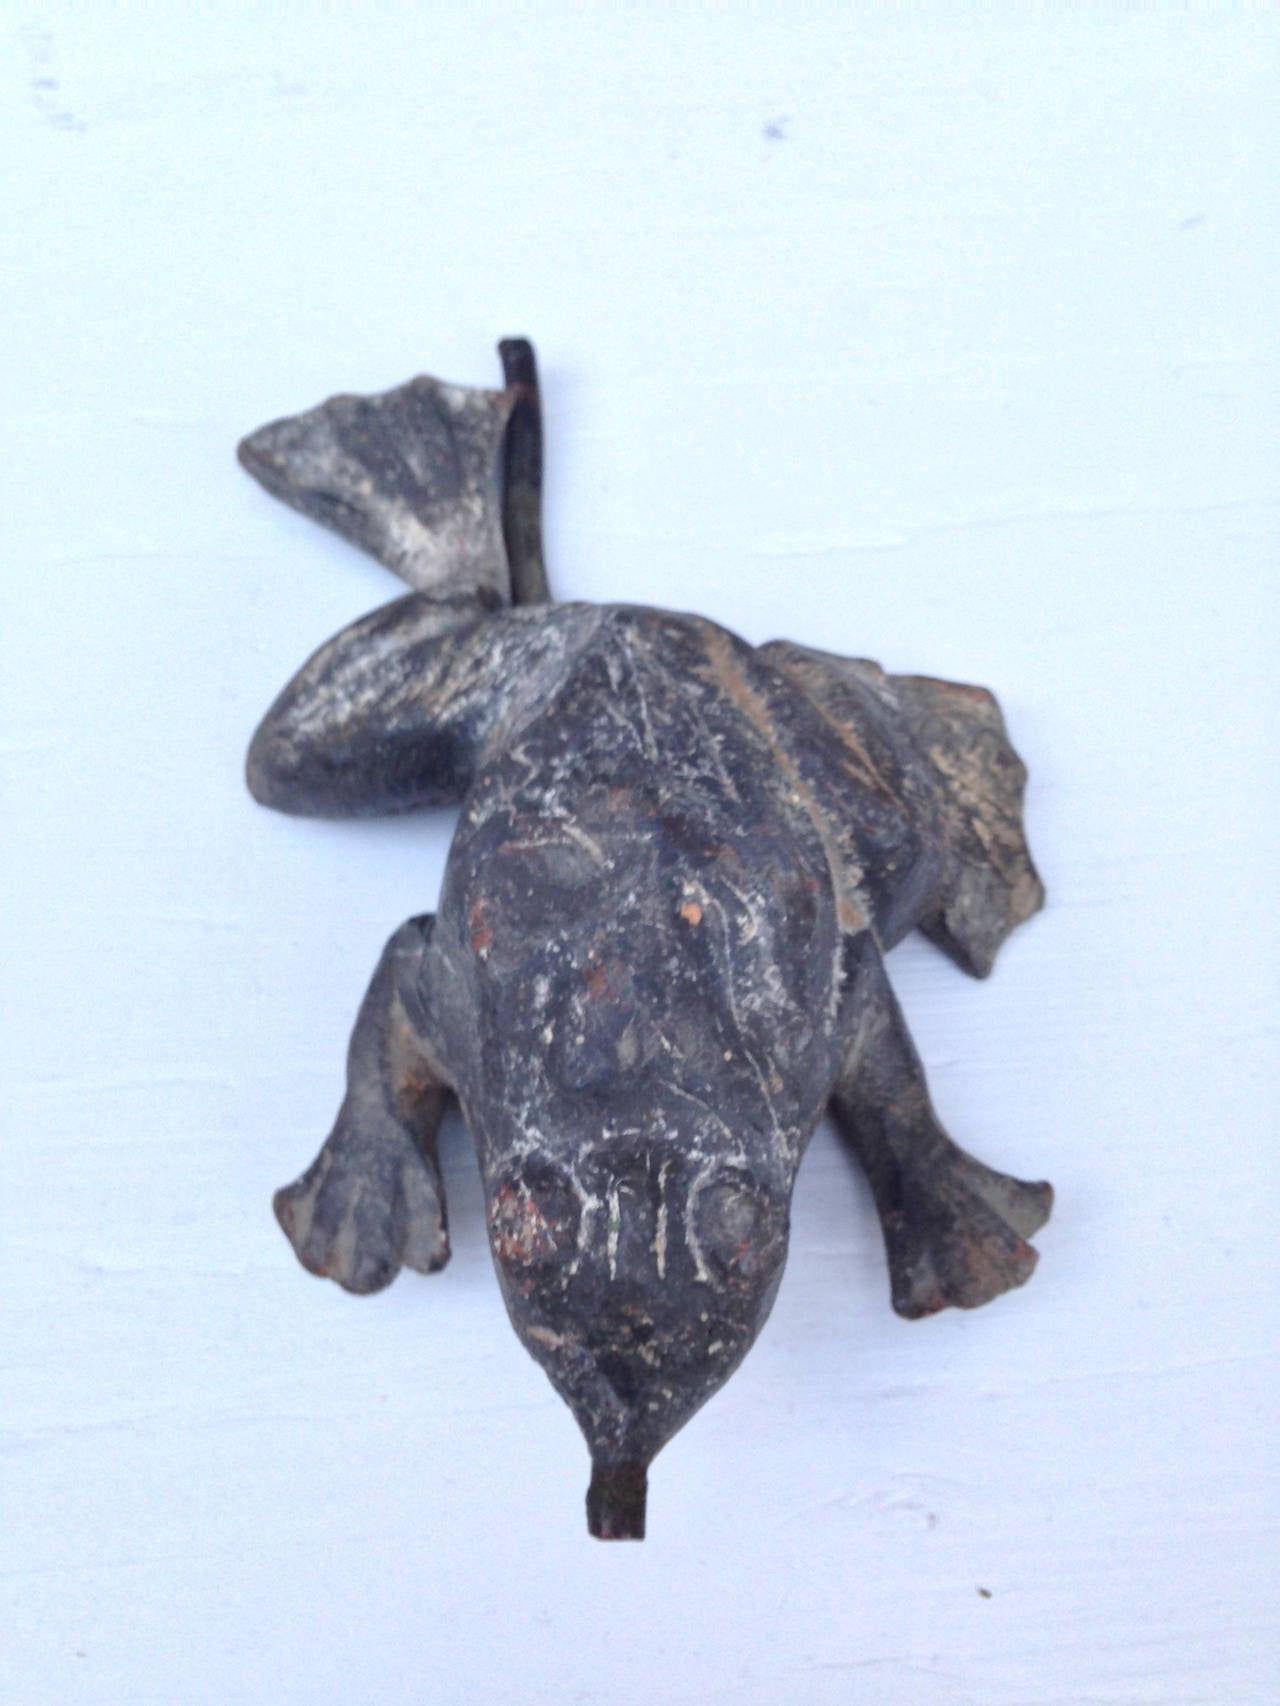 Early 20th century lead garden fountain spitter in the form of a frog, aged patina.